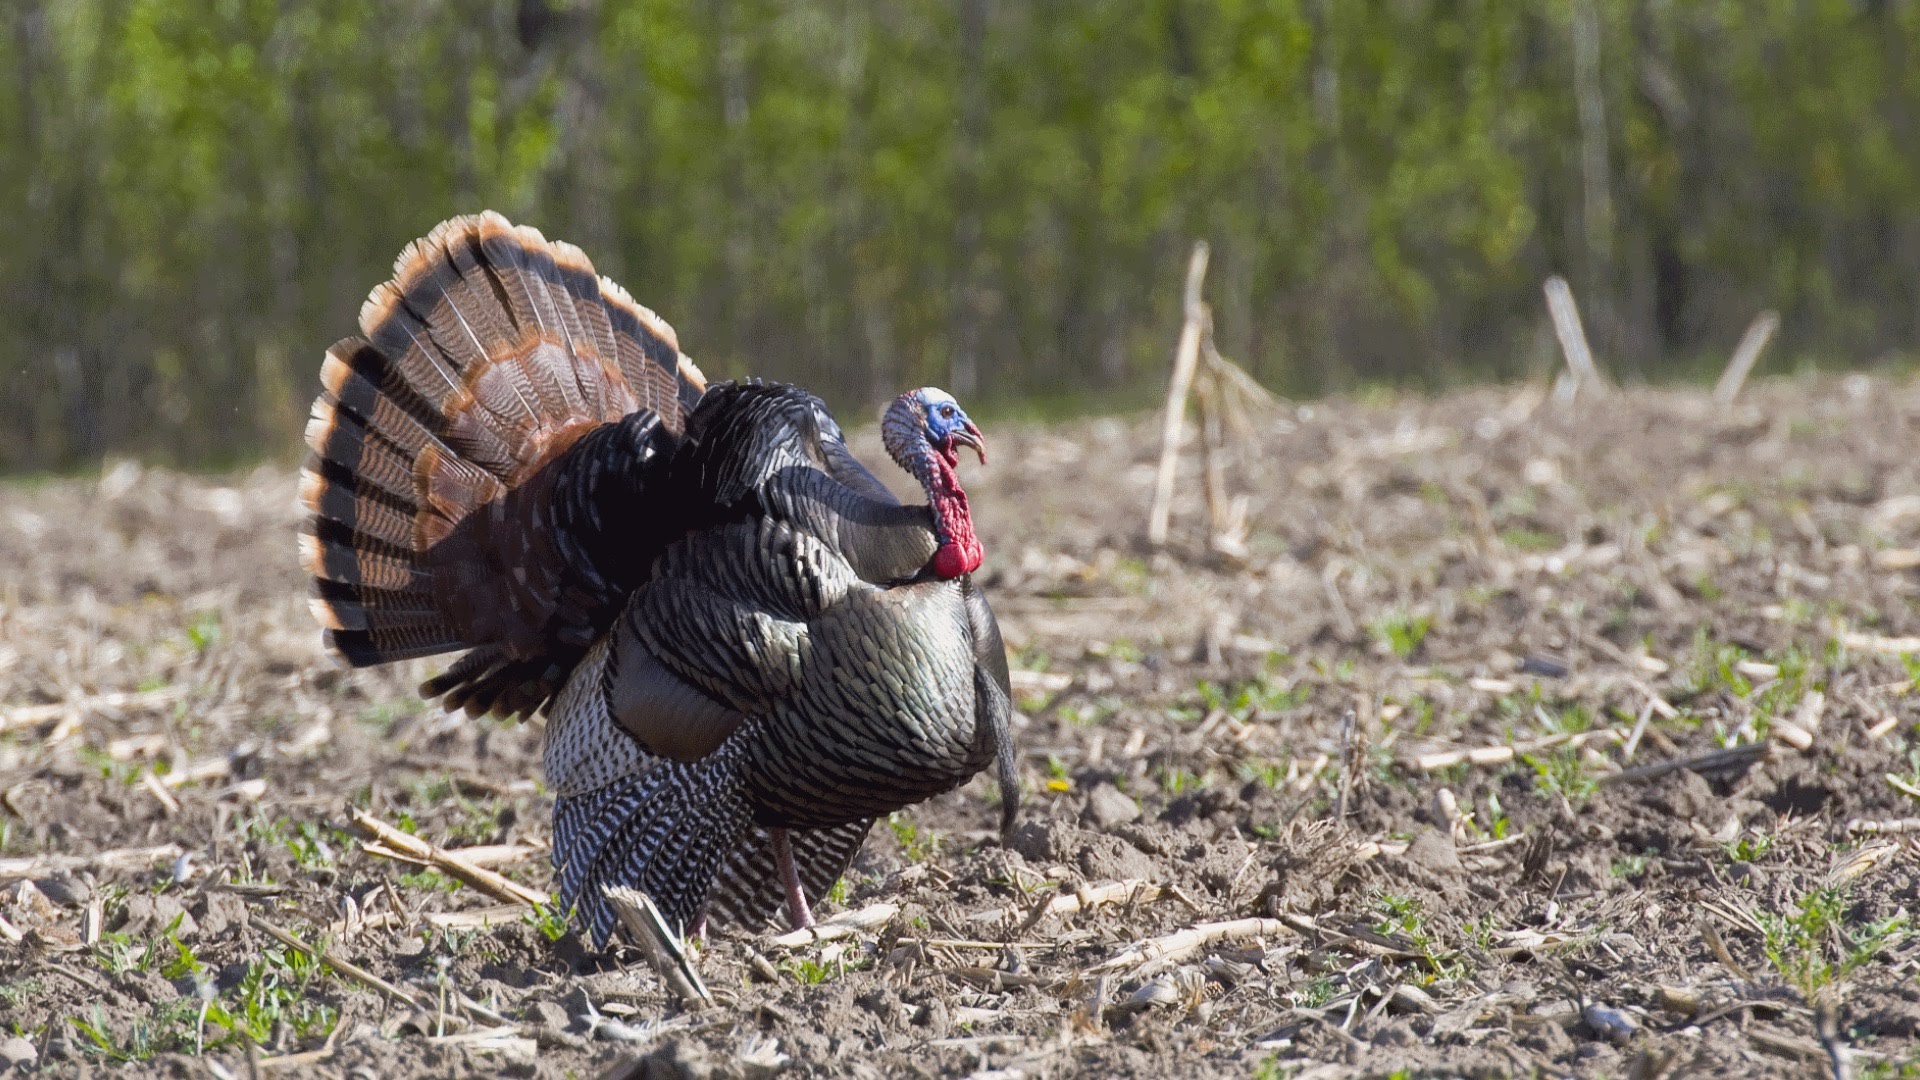 5 Fascinating Facts About Wild Turkeys - YouTube